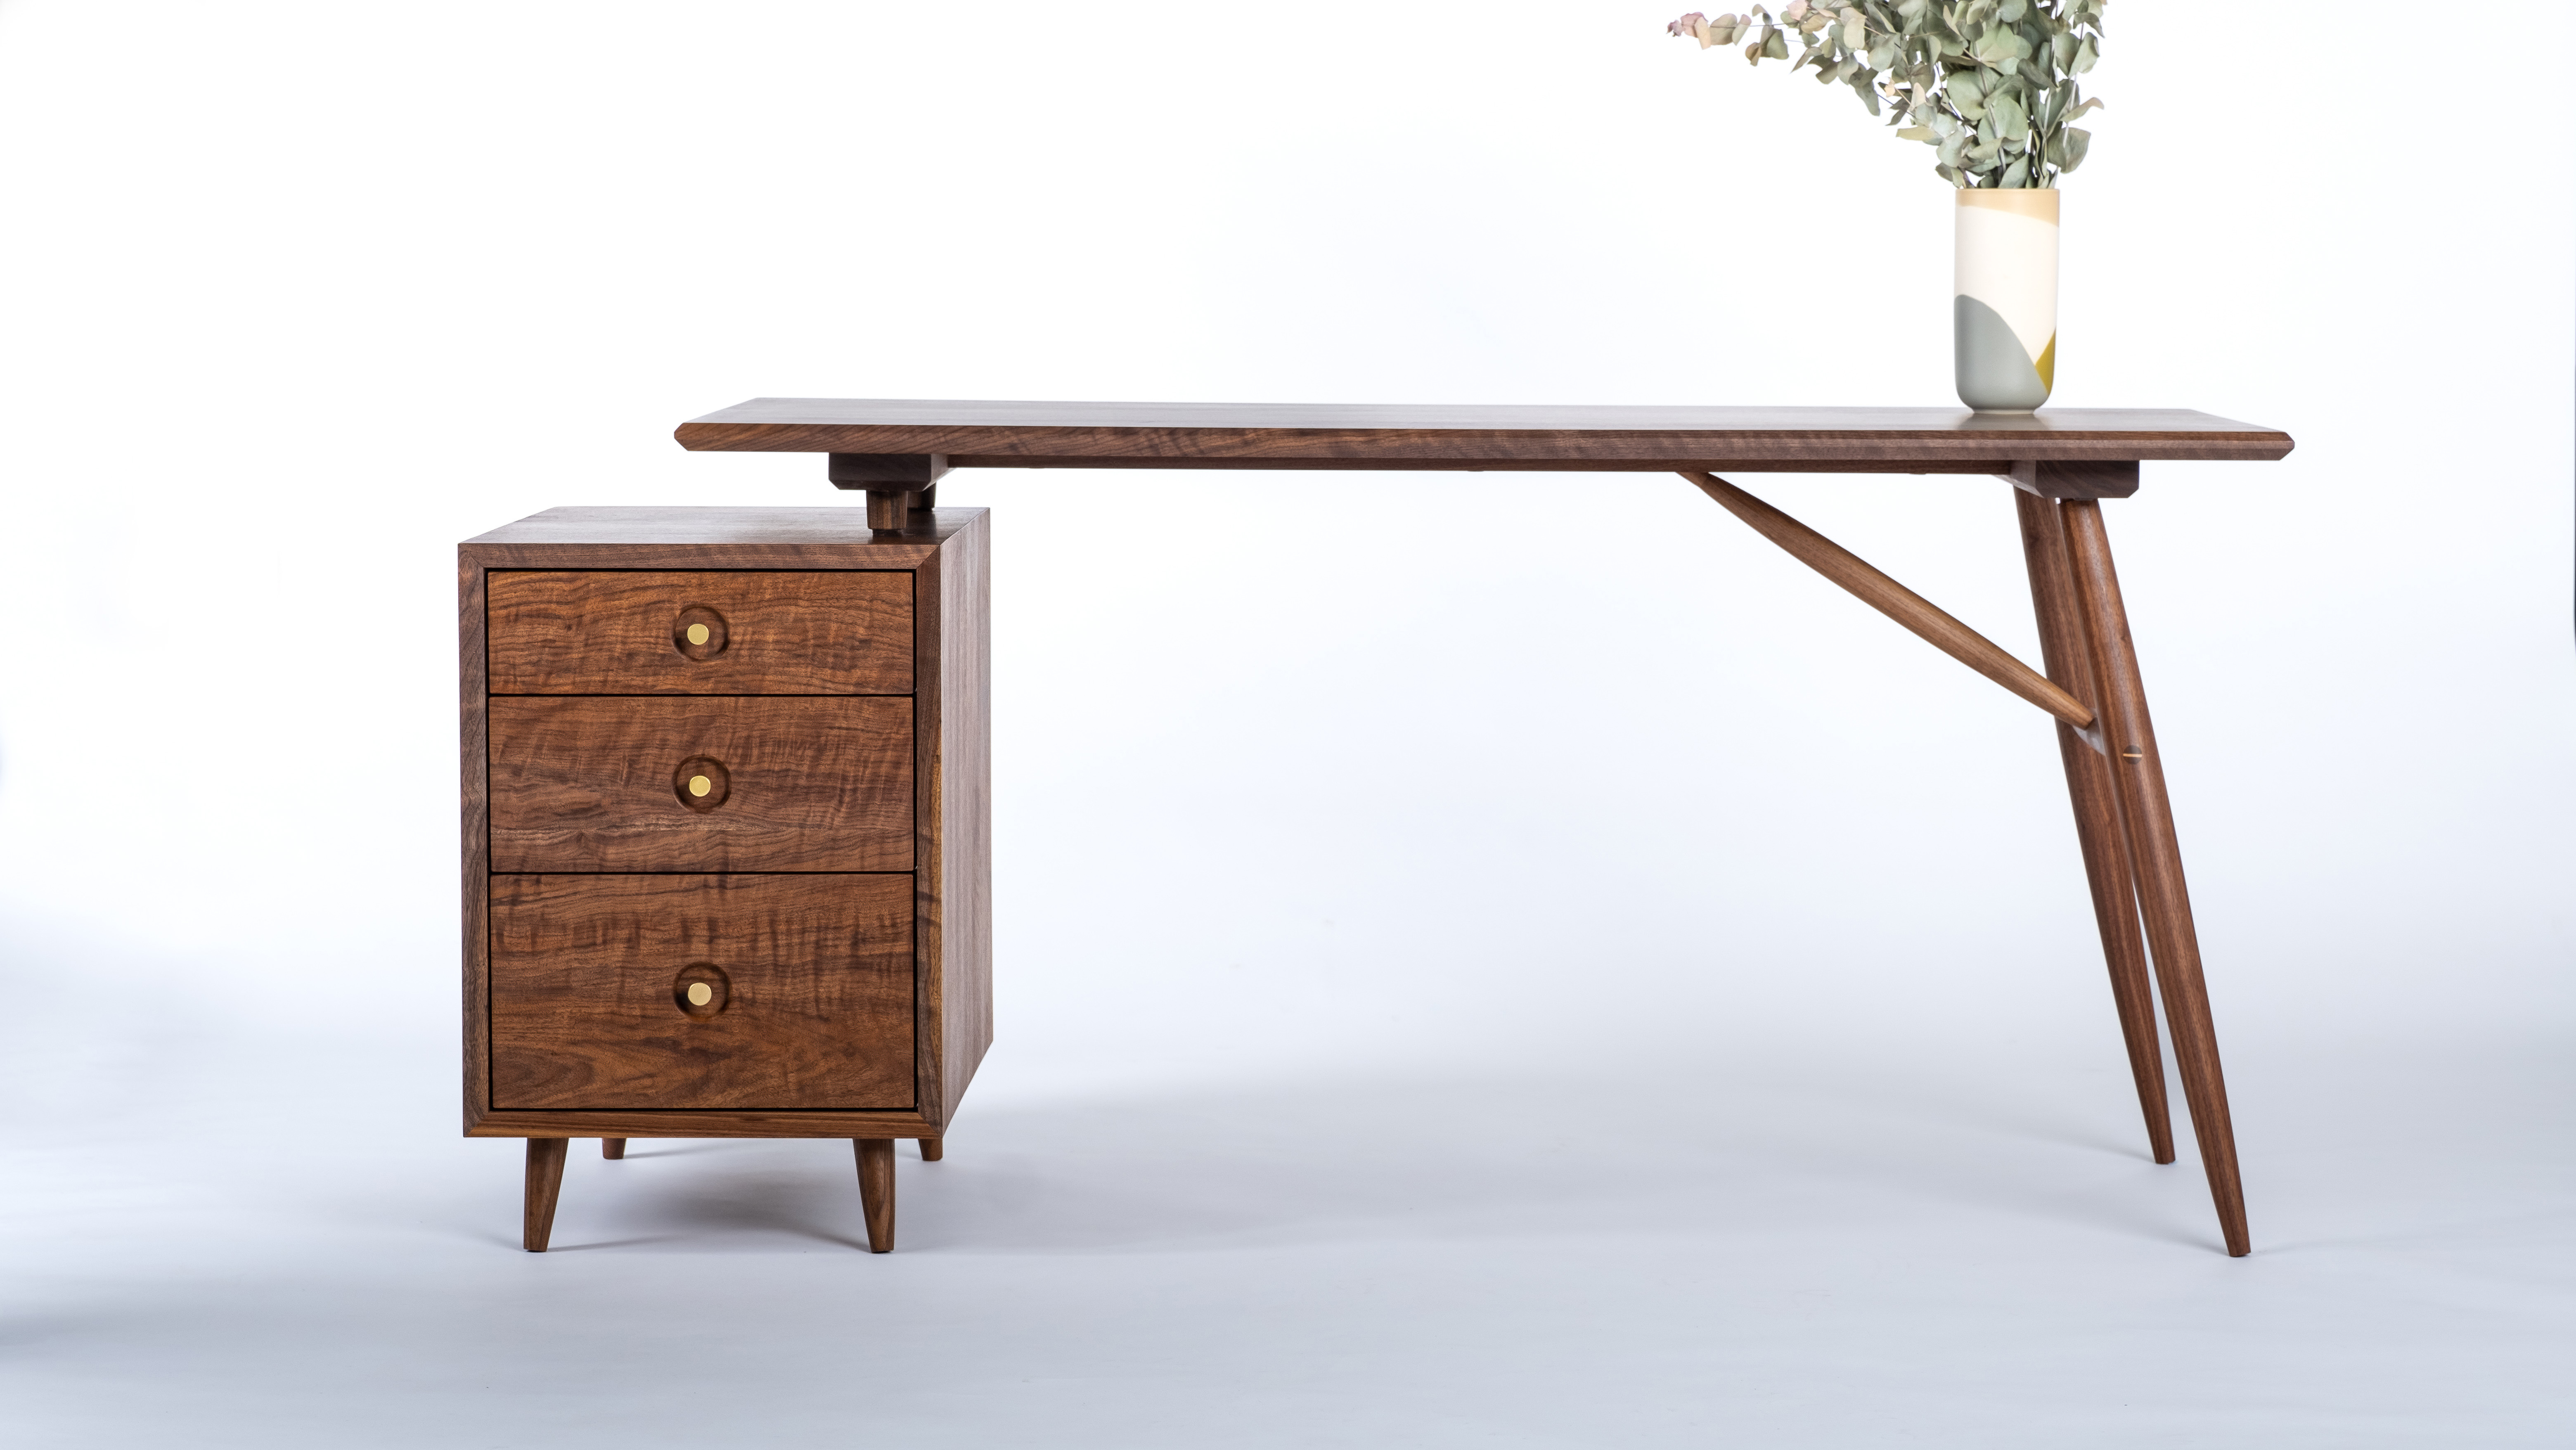 A walnut desk with a box of three drawers on the left and simple turned legs on the right. All walnut, called the Muir Writing Desk.